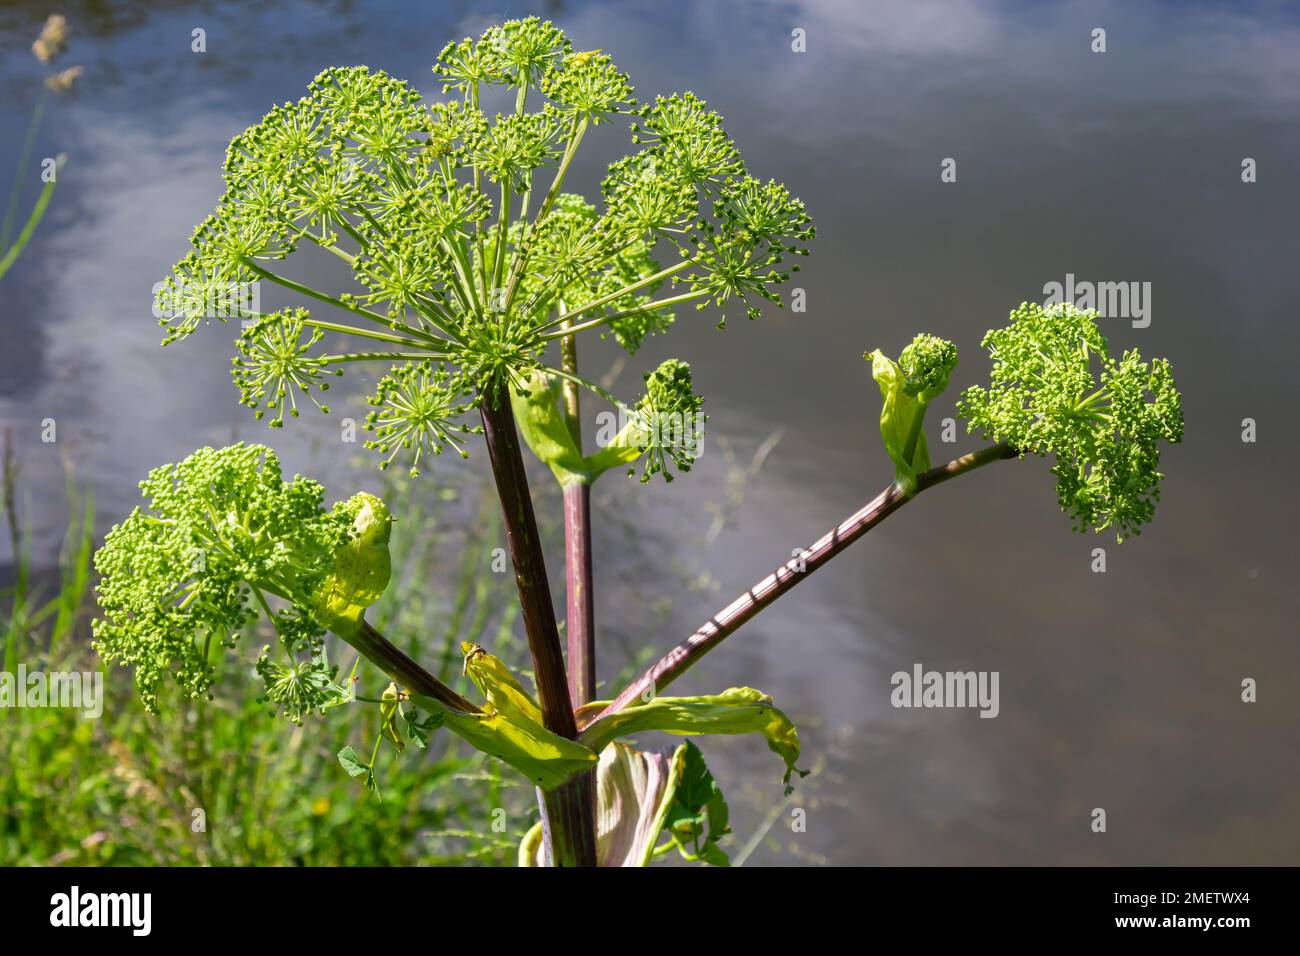 Angelica, Angelica, Archangelica, belongs to the wild plant with green flowers. It is an important medicinal plant and is also used in medicine. Stock Photo